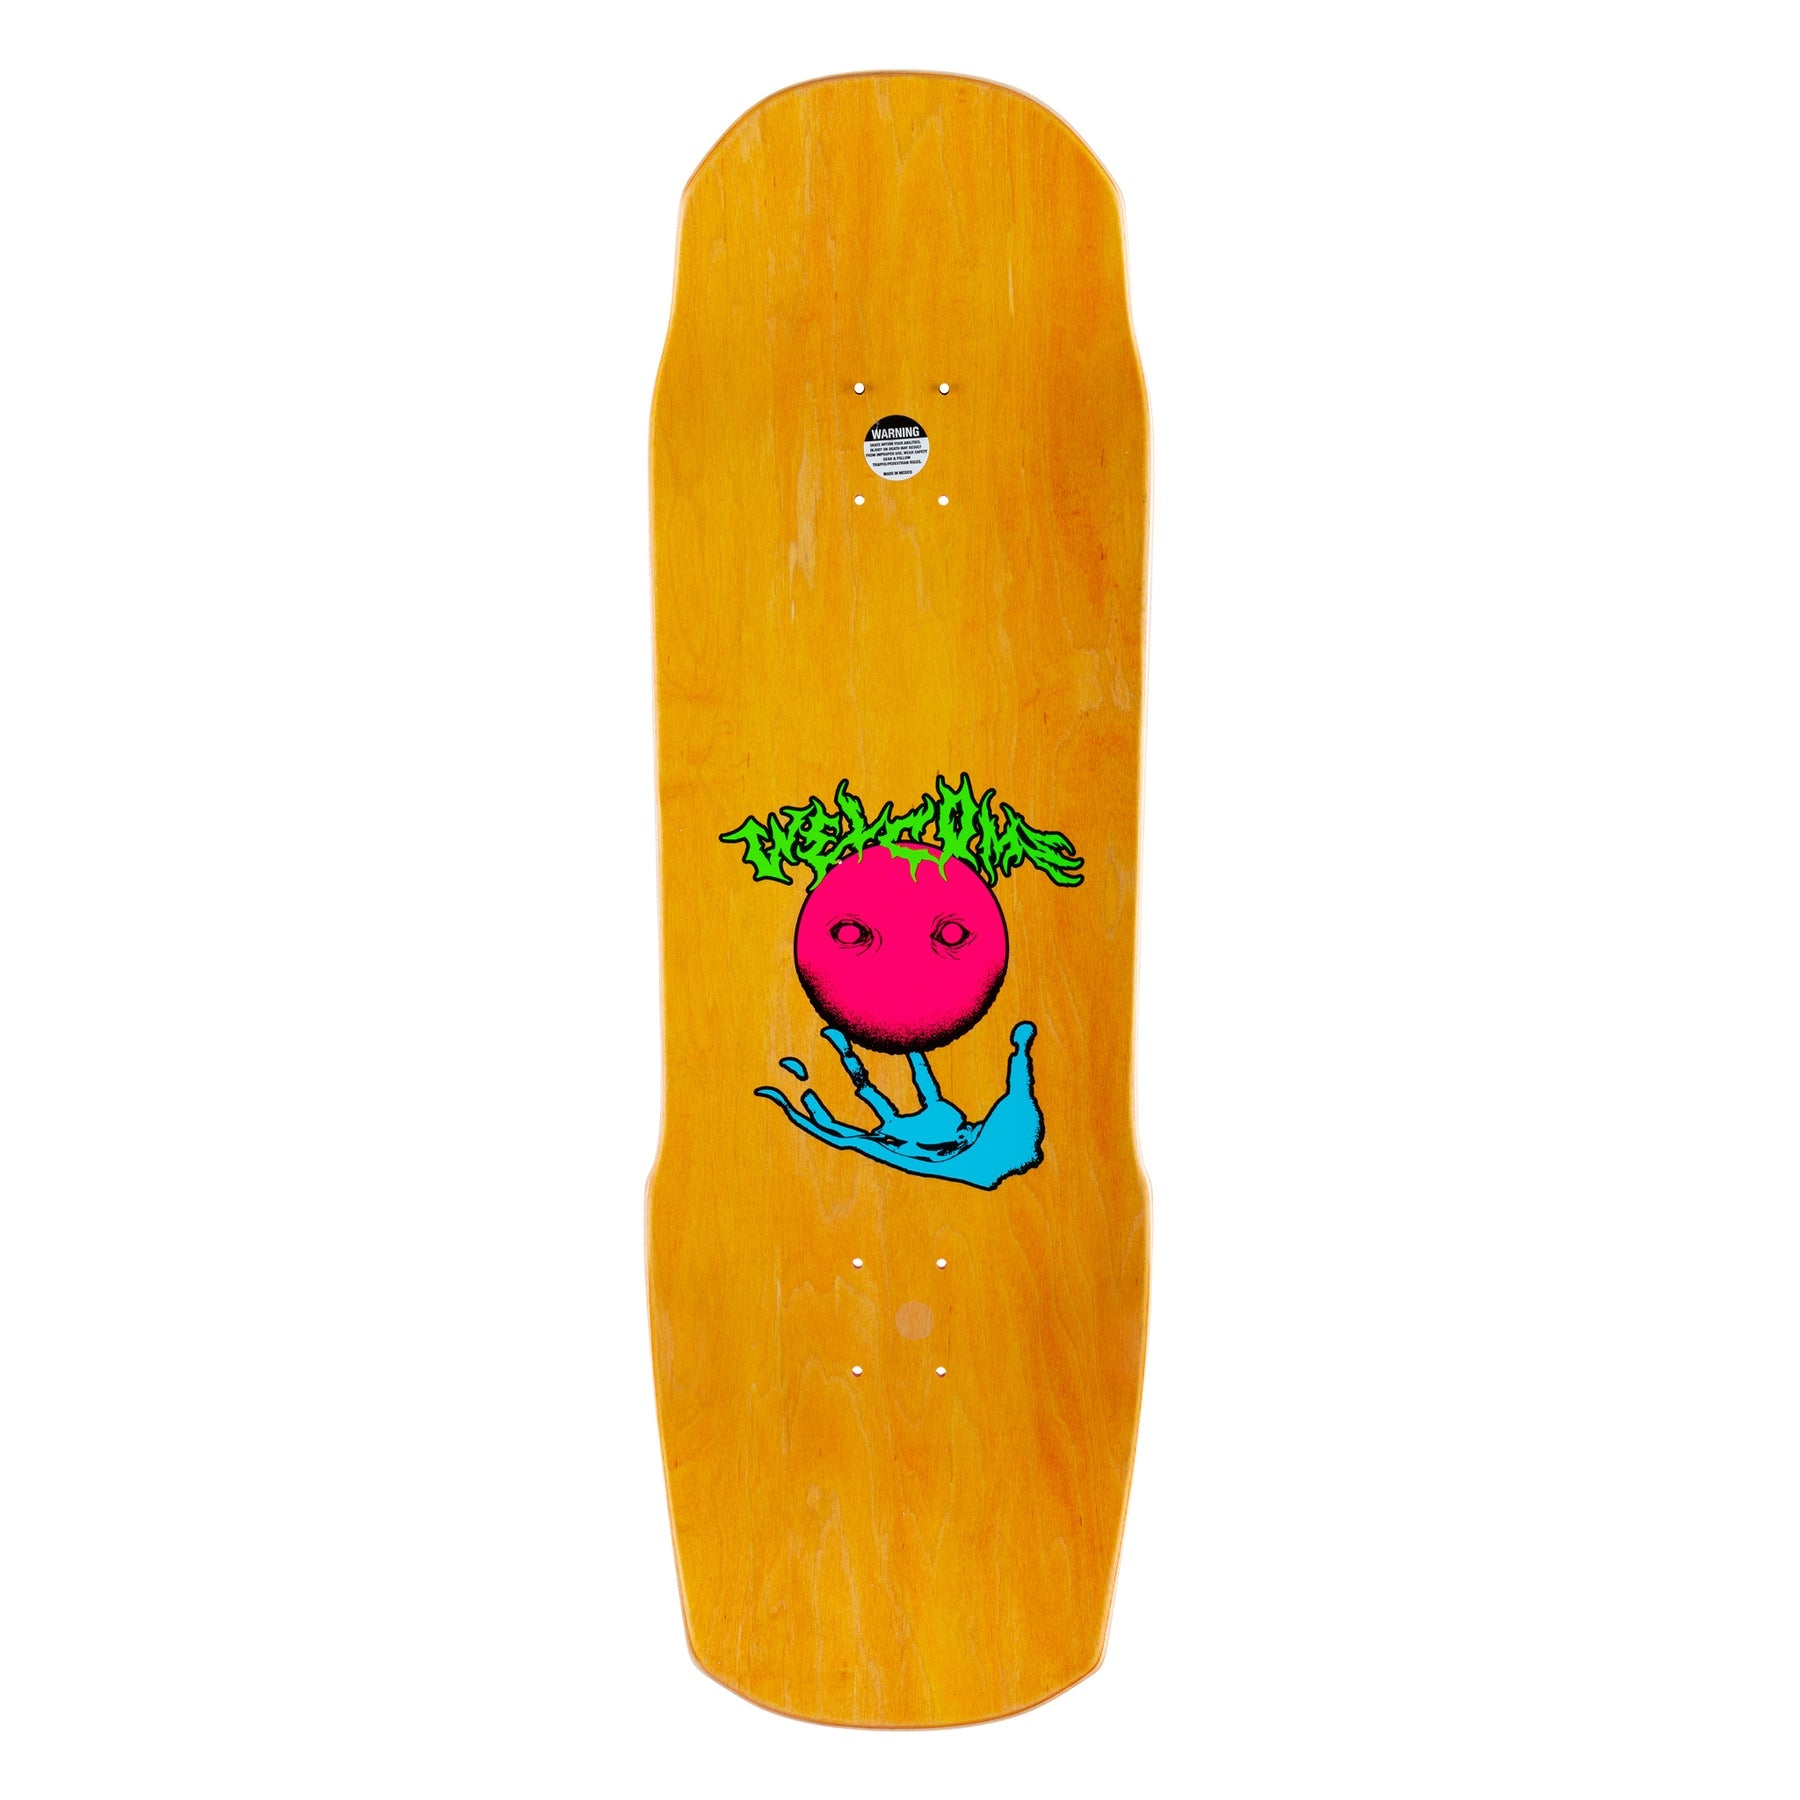 WELCOME DECK LIGHT AND EASY - TOTEM 2.0 SHAPE (9.75") - The Drive Skateshop